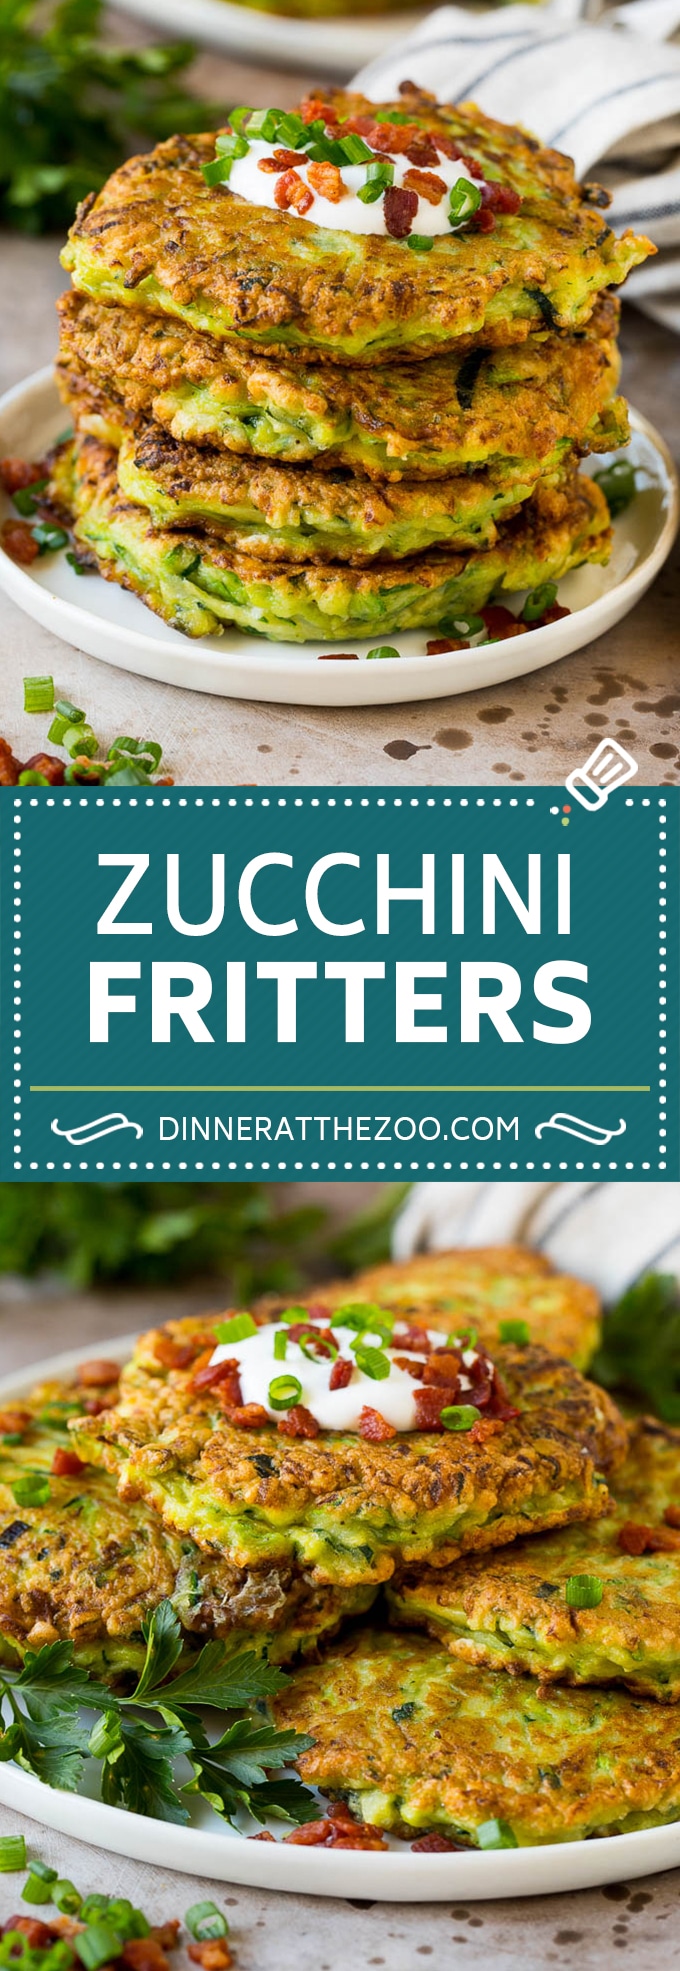 These zucchini fritters are crispy patties filled with shredded squash and flavored with garlic and herbs.